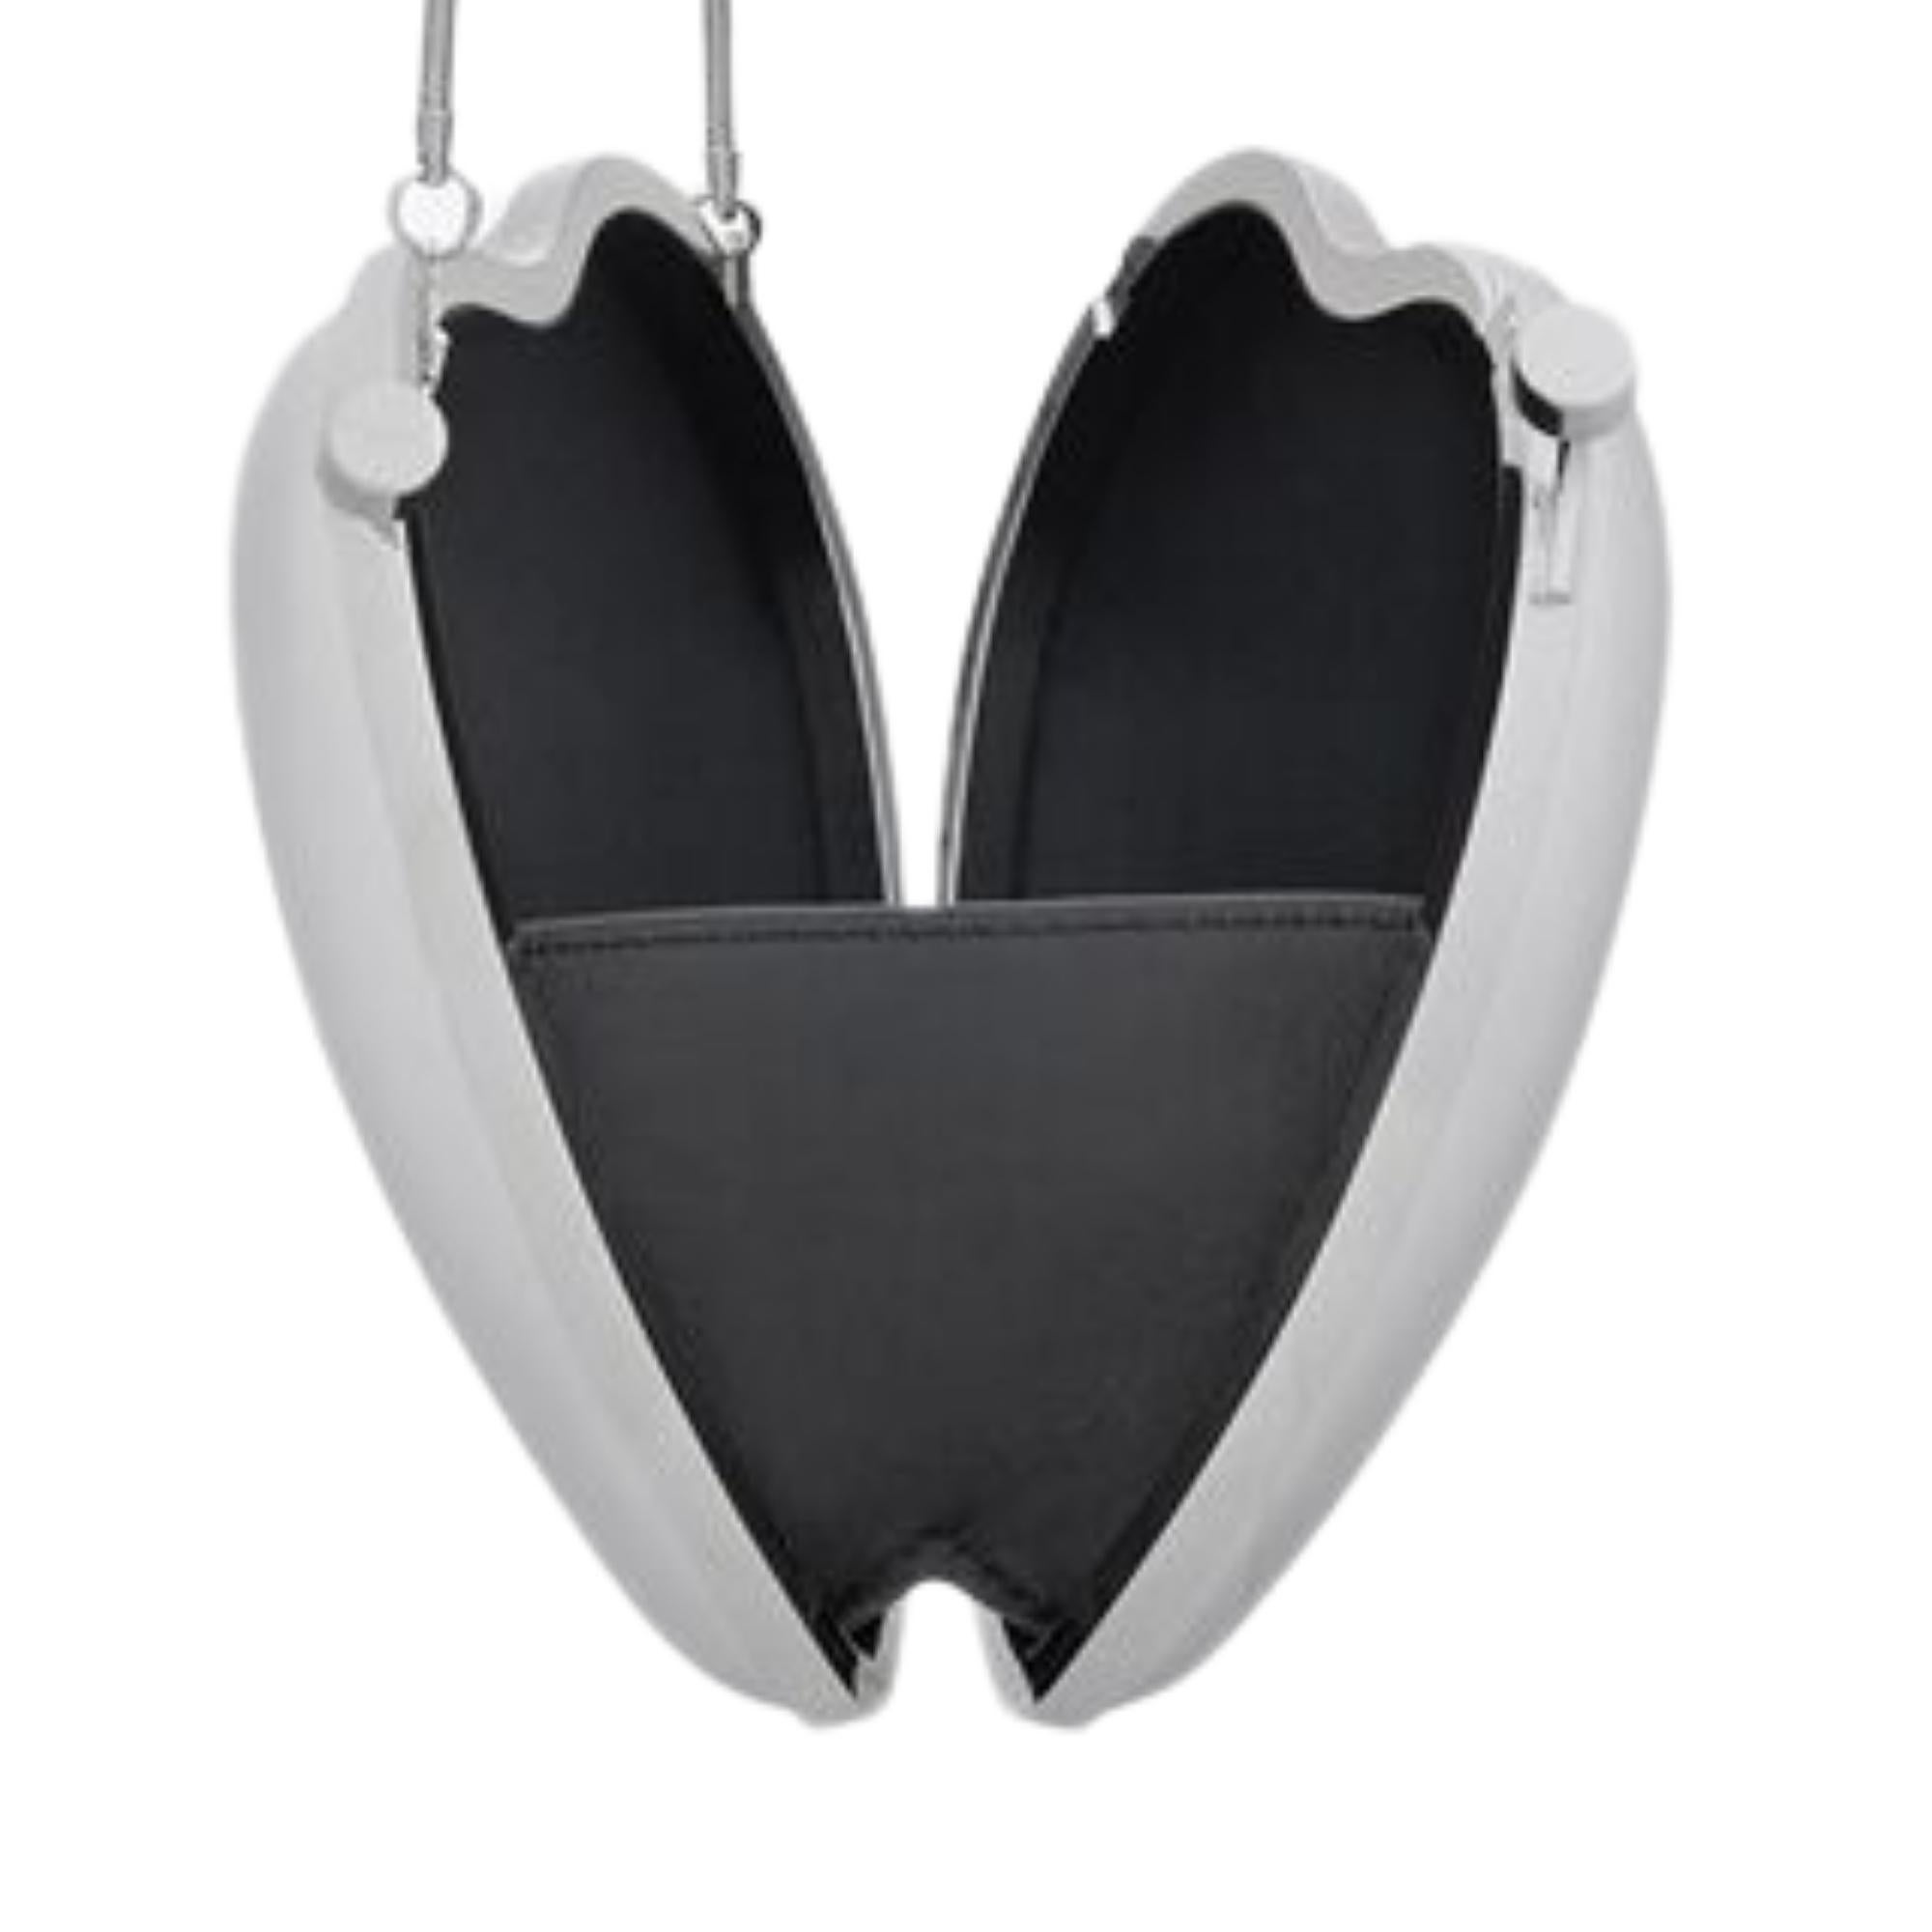 This structured heart-shaped bag is made with vinyl and features a metal snake link chain, metal interlocking ysl signature at front, silver-toned metal hardware, kiss-lock closure and one main compartment with satin lining in black.

COLOR: